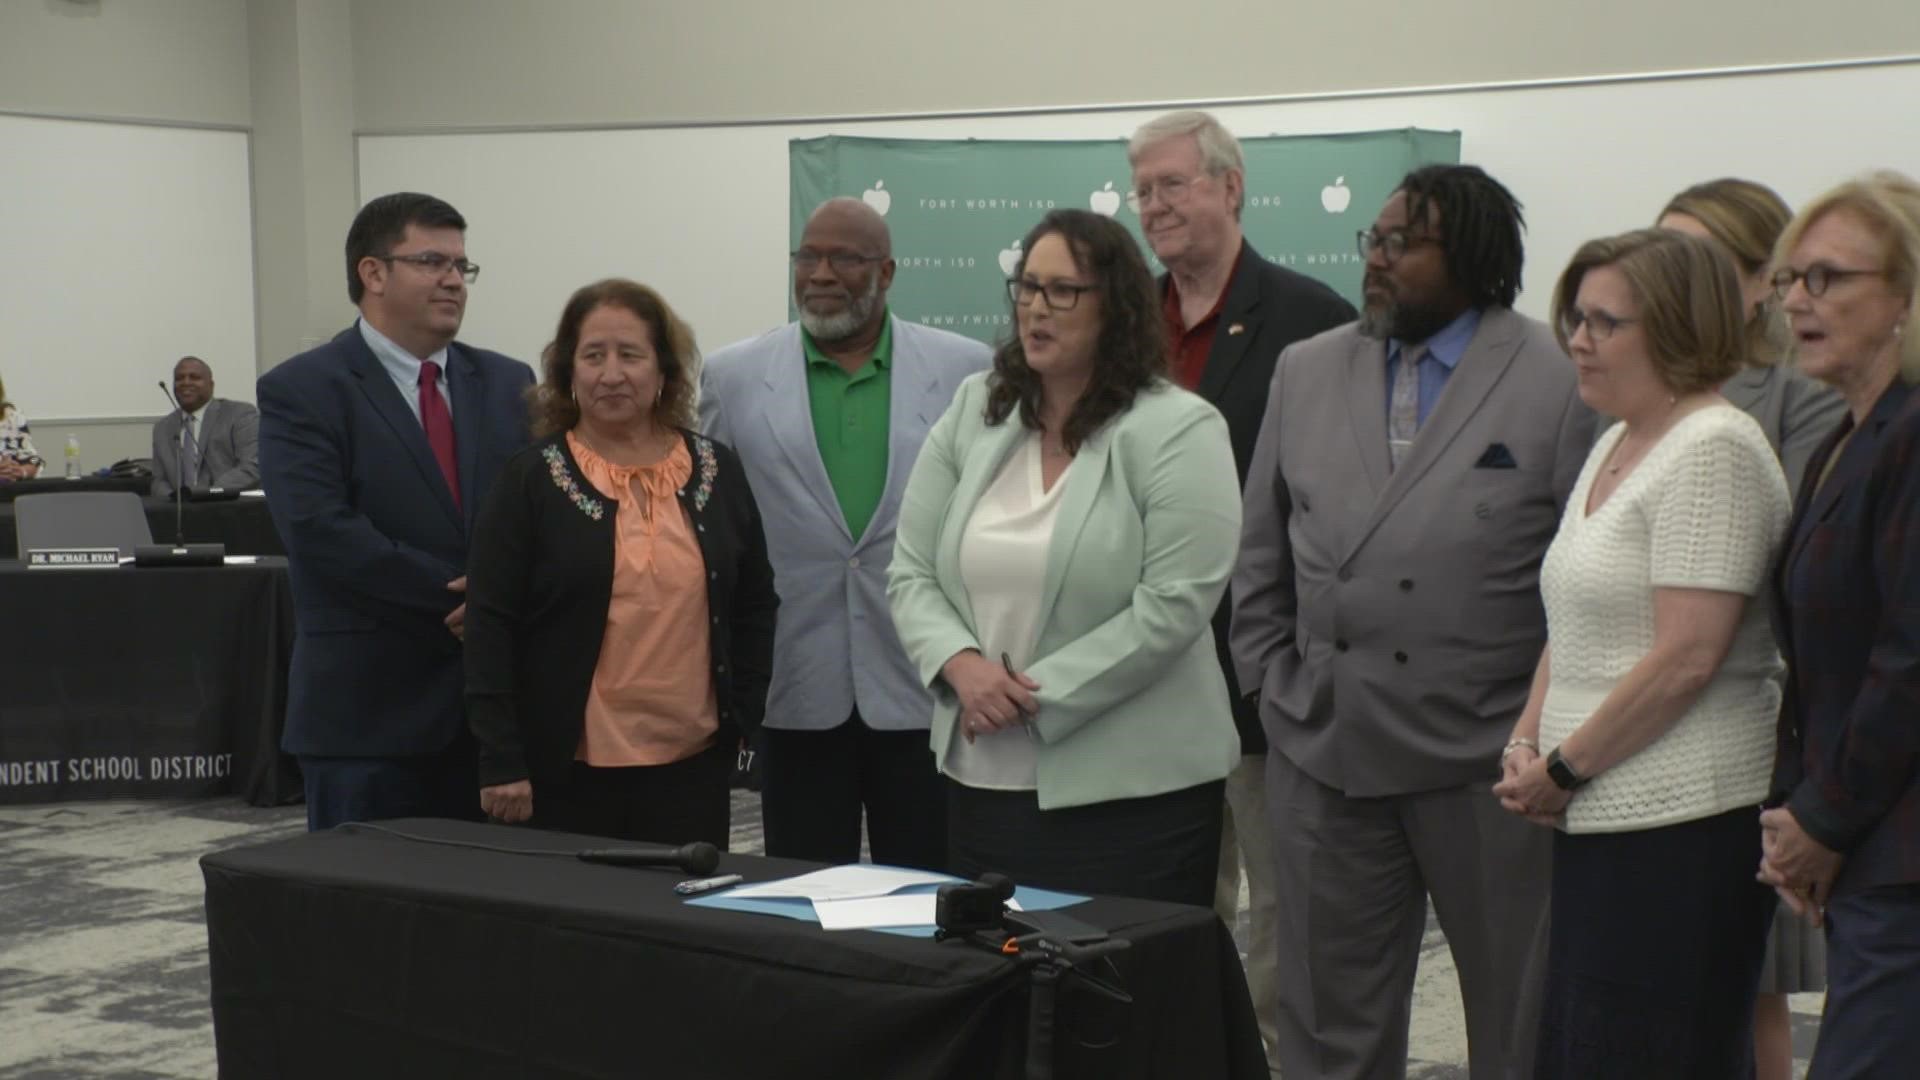 The Fort Worth ISD school board voted unanimously to name Dr. Angélica Ramsey as its superintendent on Tuesday. Ramsey signed a three-year contract.